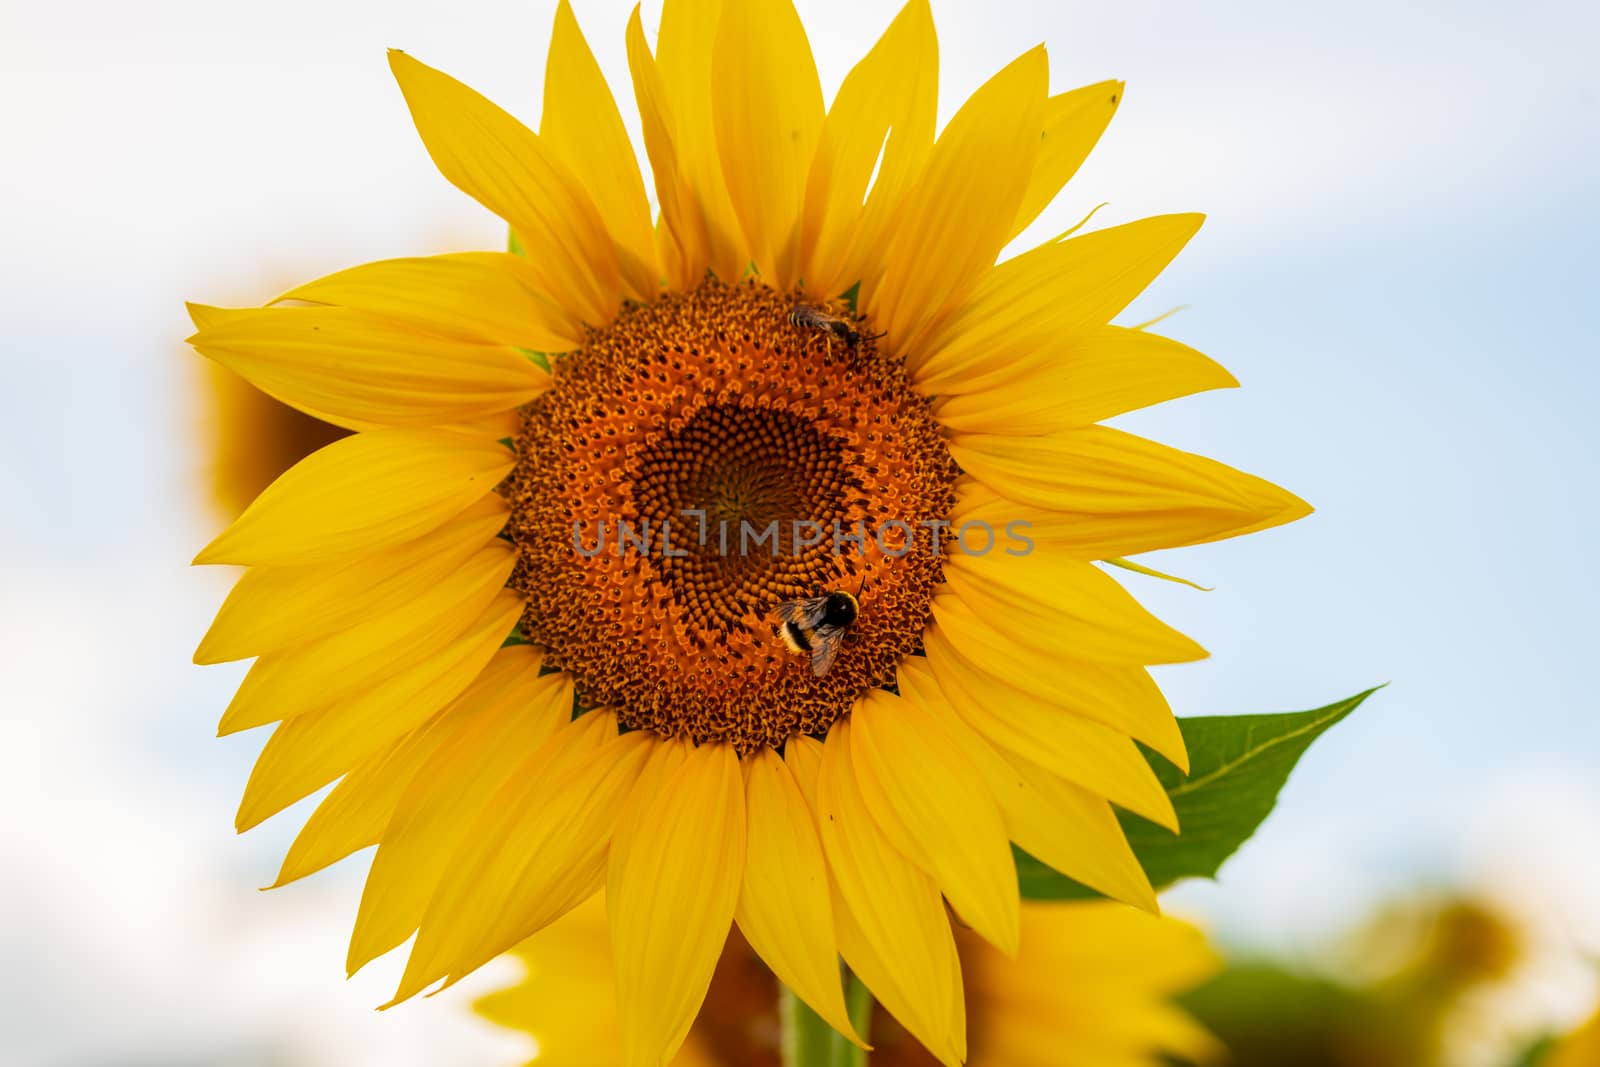 Bumblebbe, Bombus, Bombus cryptarum, on sunflower pollinating and collecting nectar, isolated blossom against blue sky with clouds